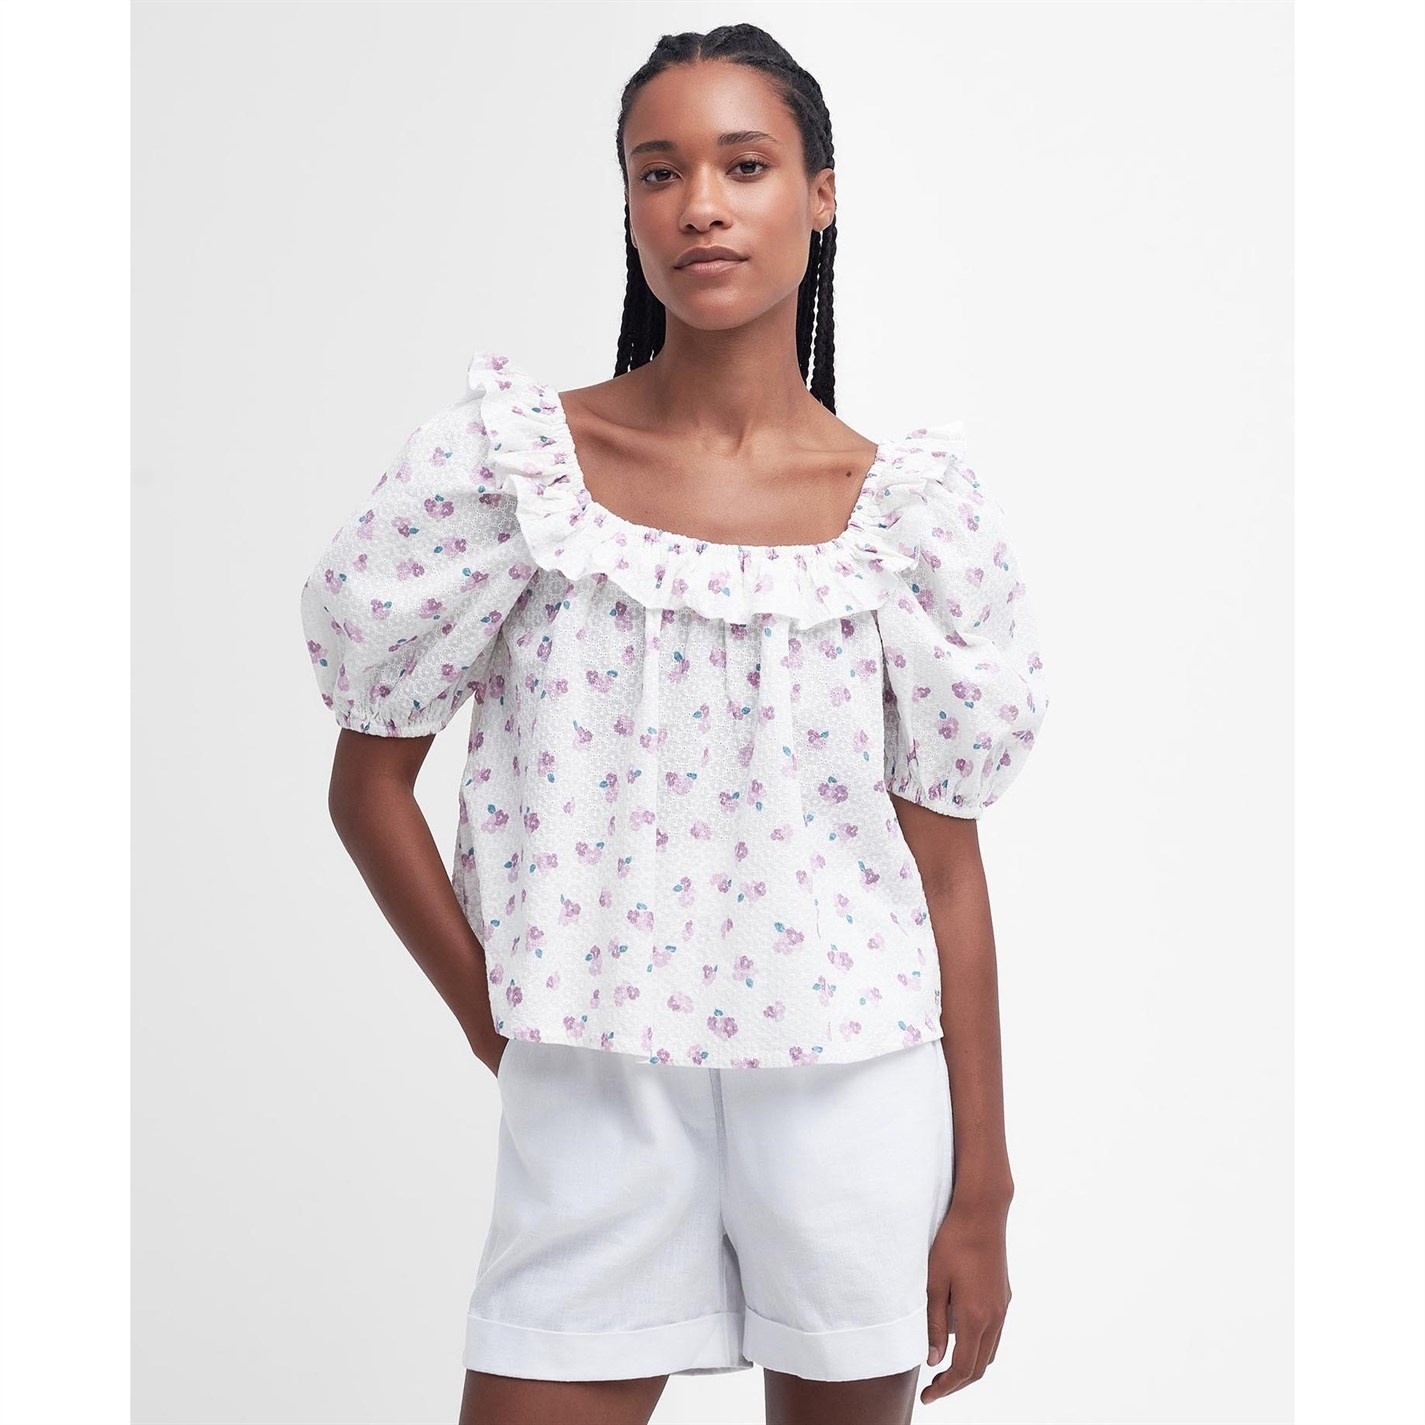 GOODLEIGH OFF-THE-SHOULDER TOP - 2